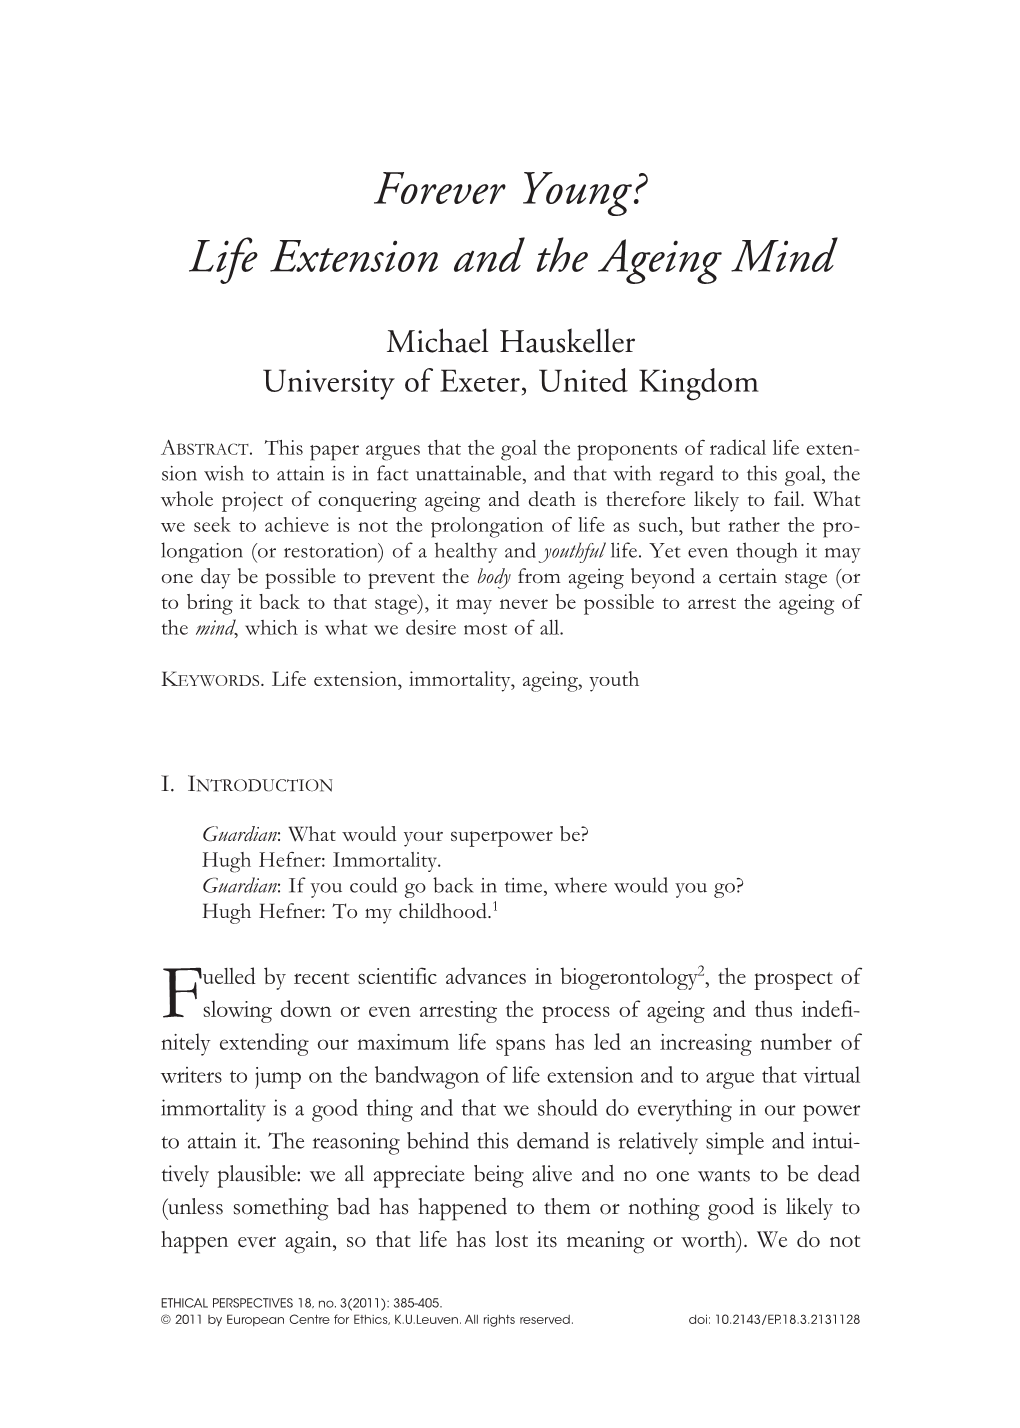 Forever Young? Life Extension and the Ageing Mind